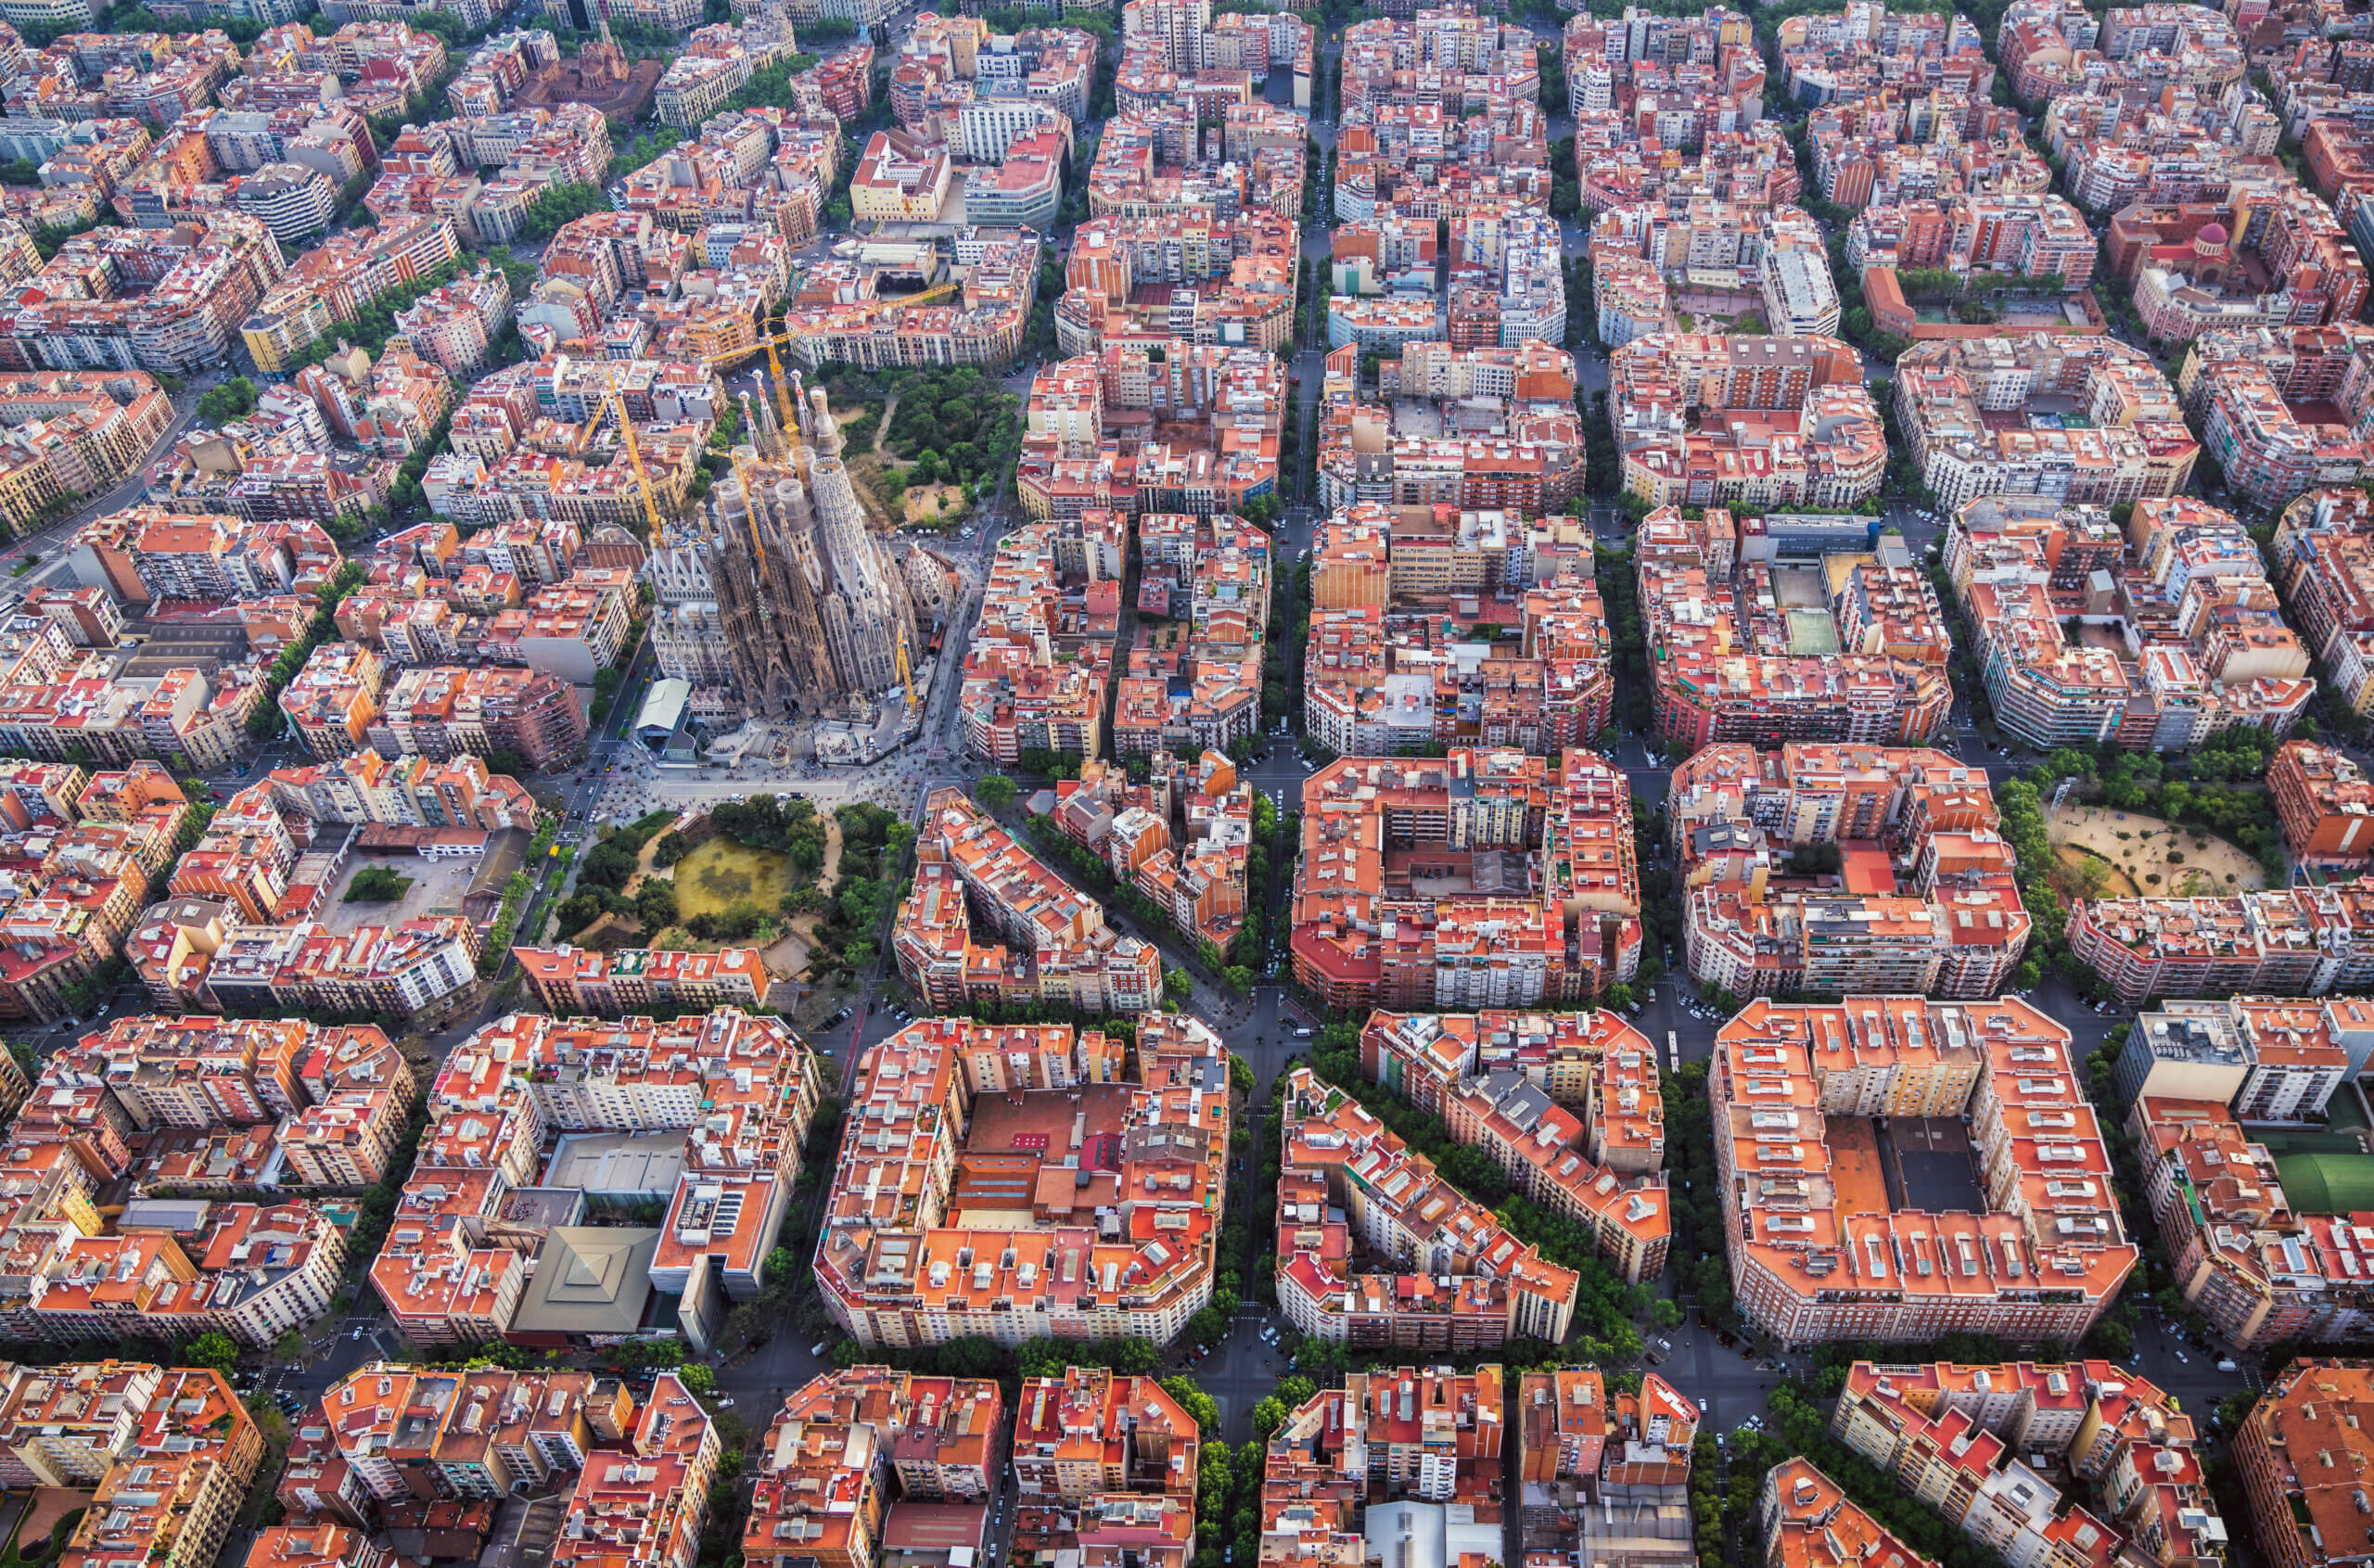 Aerial view of Barcelona Example residential district and Sagrada Familia, Spain. Late afternoon light